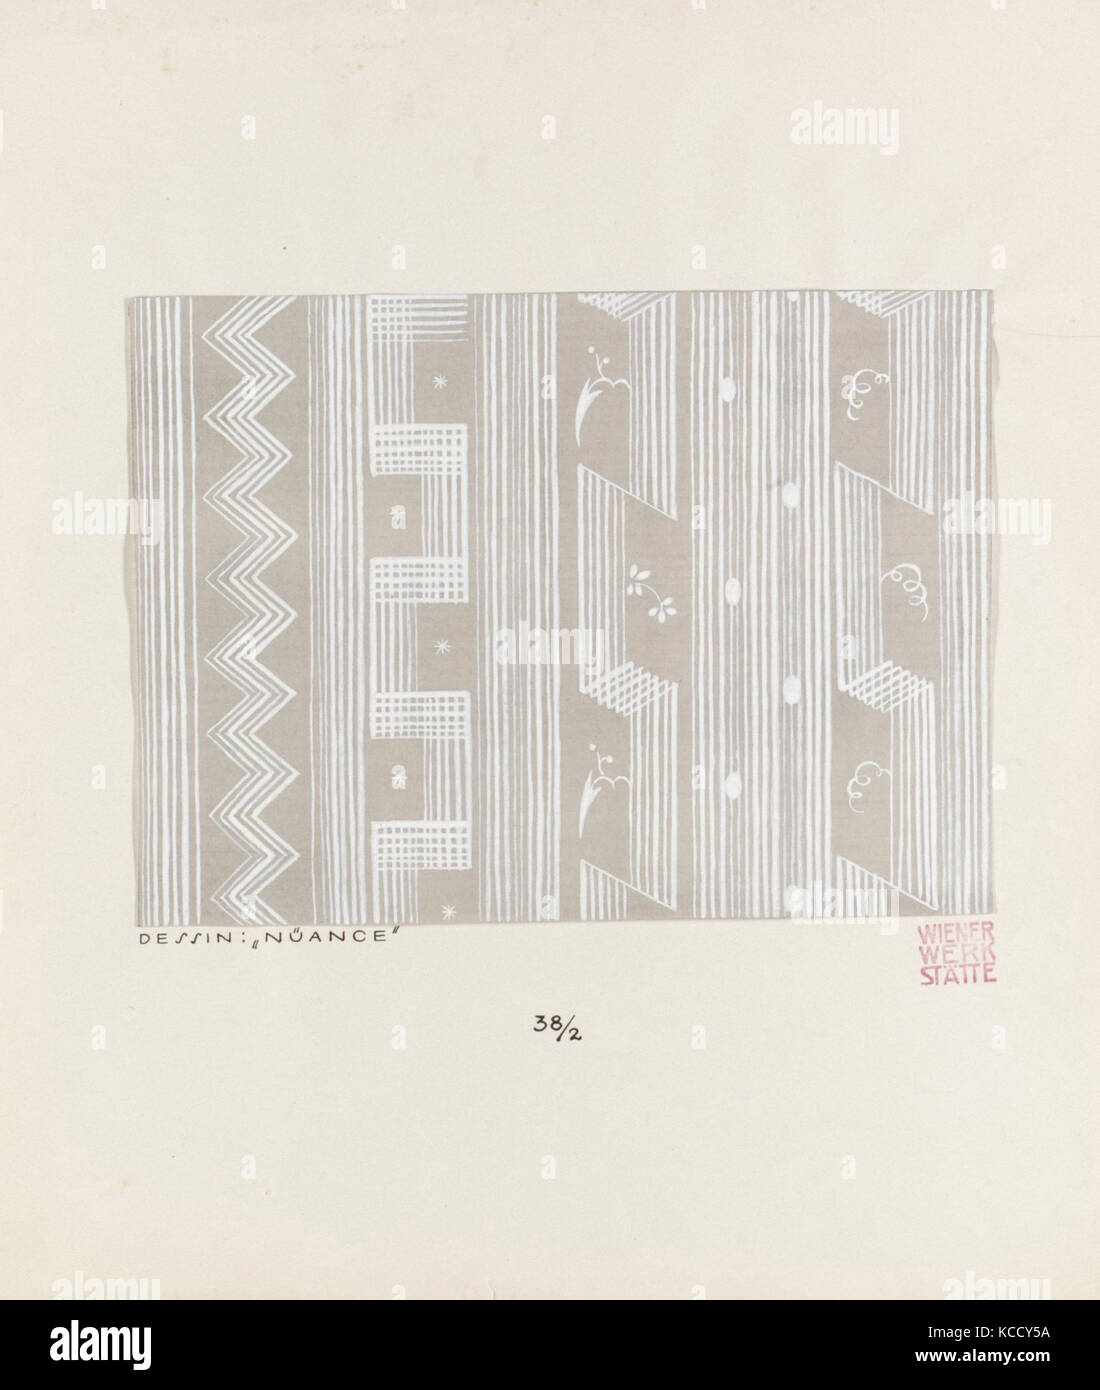 NUANCE, 1922, Gouache on paper, 12 3/4 × 10 3/4 in. (32.4 × 27.3 cm), Drawings Stock Photo